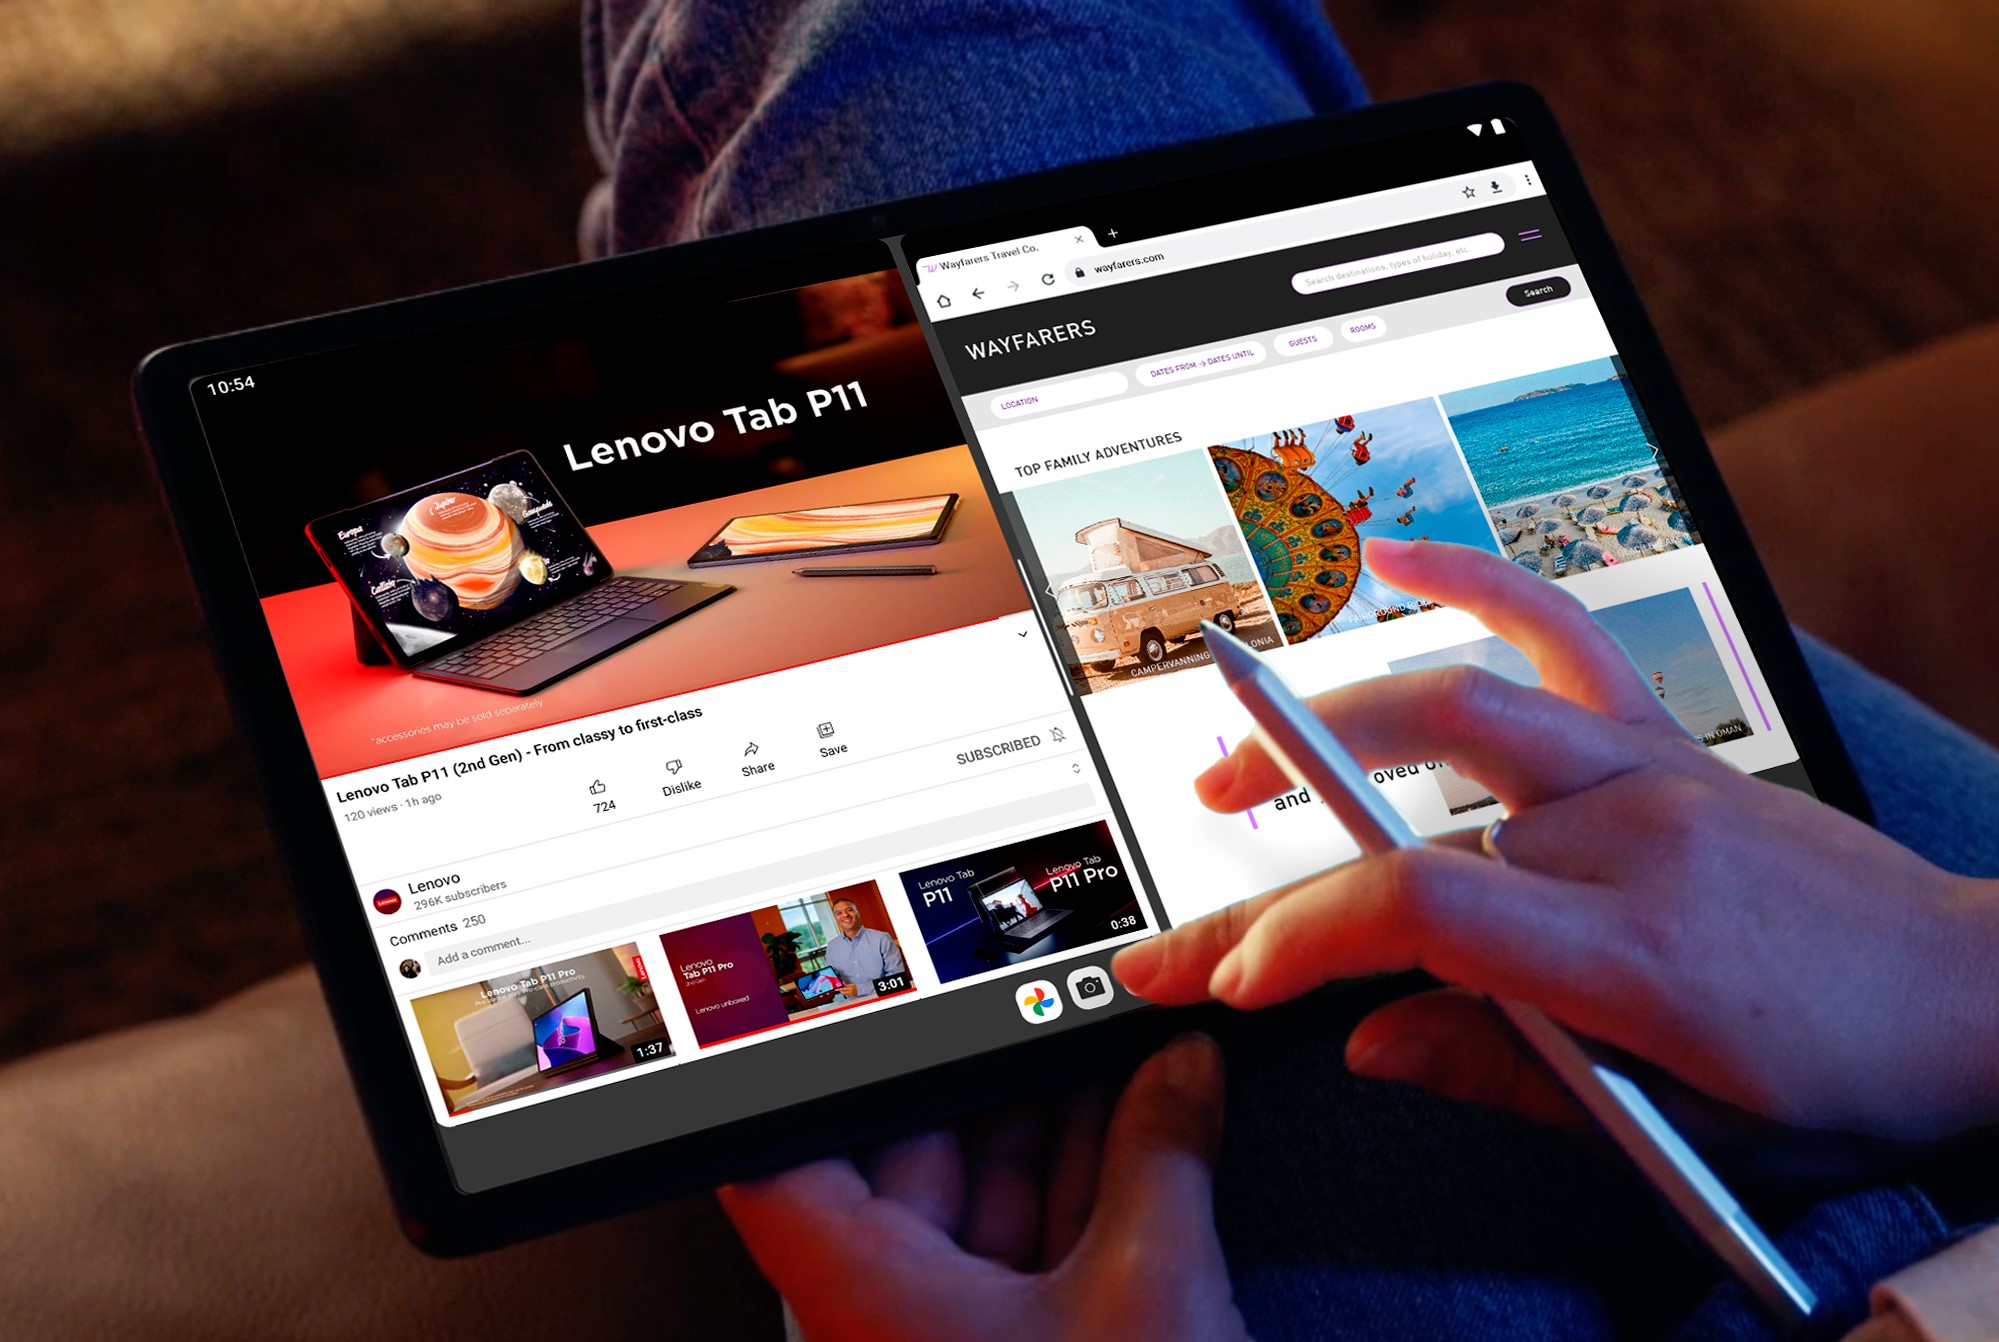 Lenovo Tab Series Tablets for Entertainment and Productivity